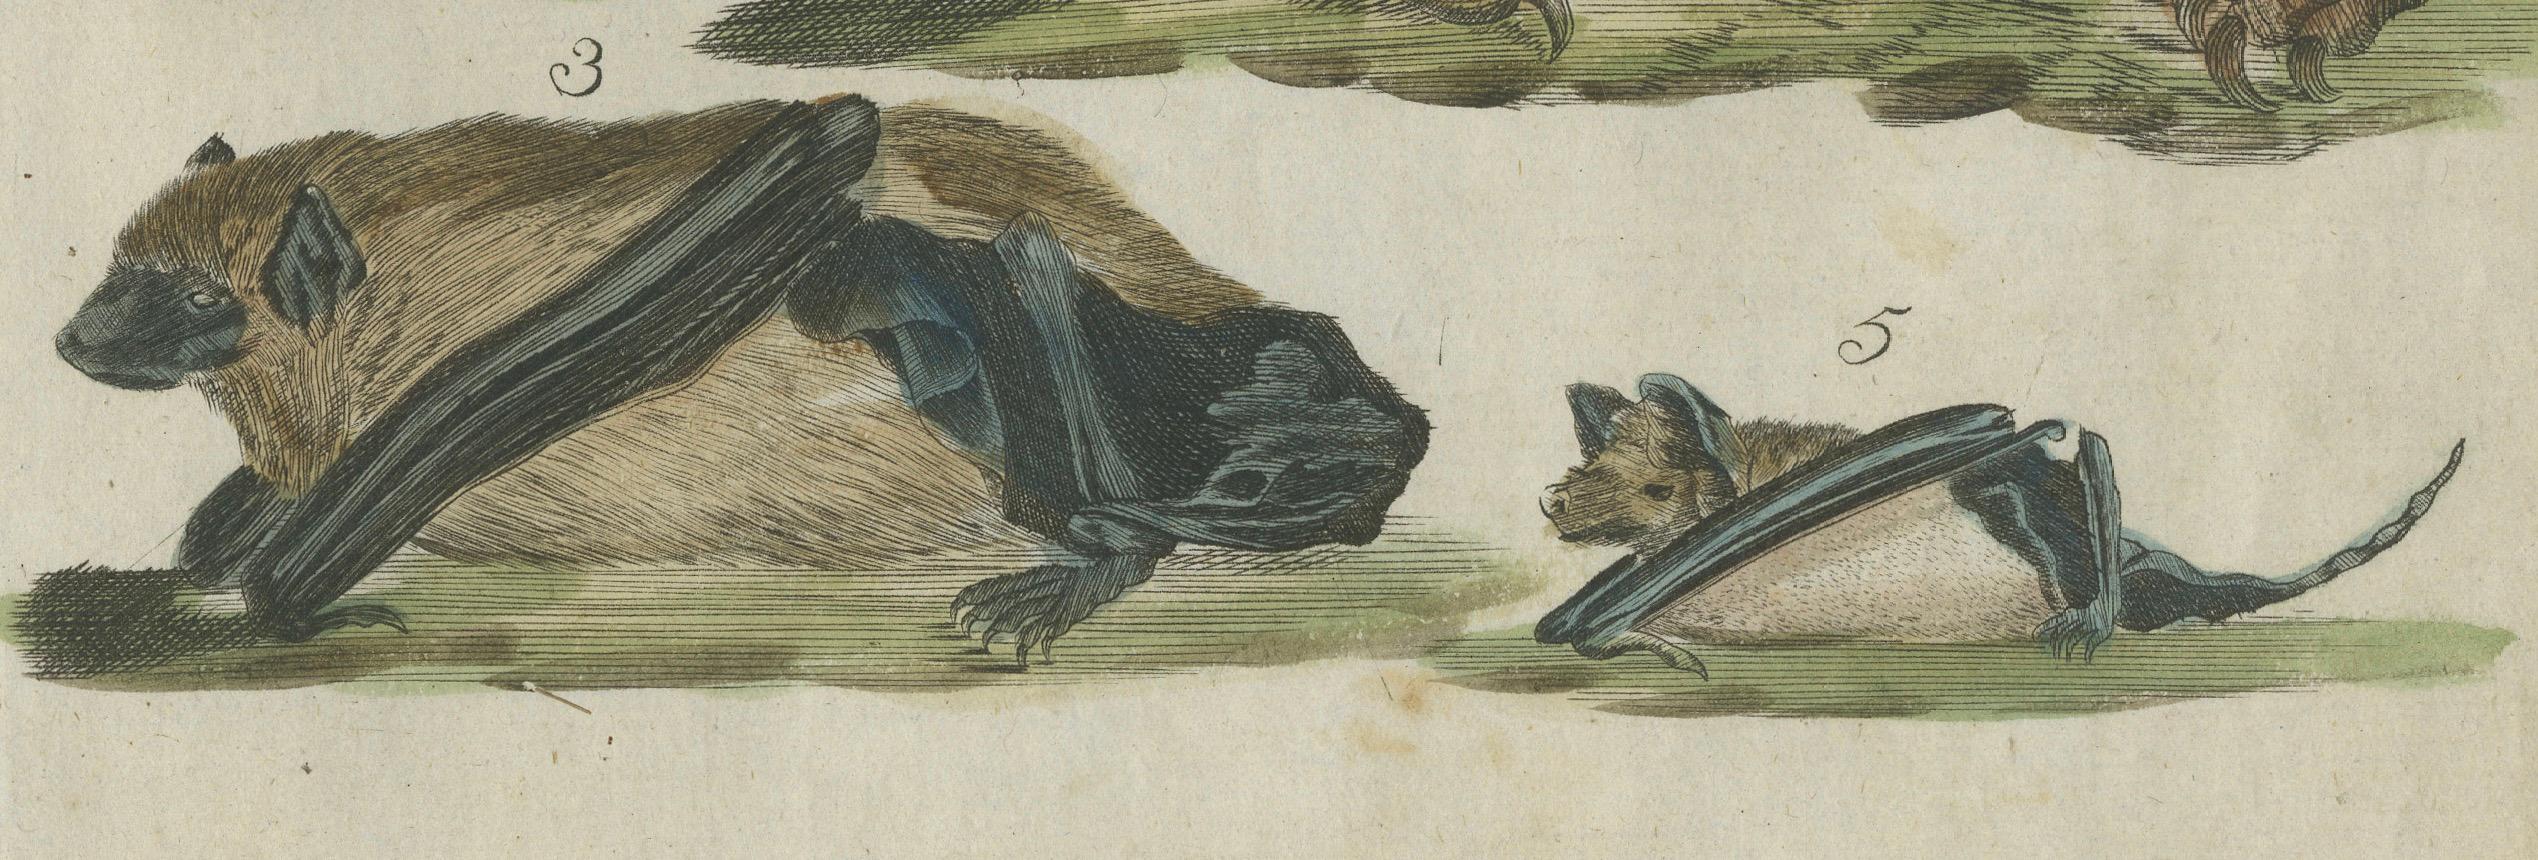 19th Century Hand Colored Antique Print of Flying Foxes and Bats, circa 1820 For Sale